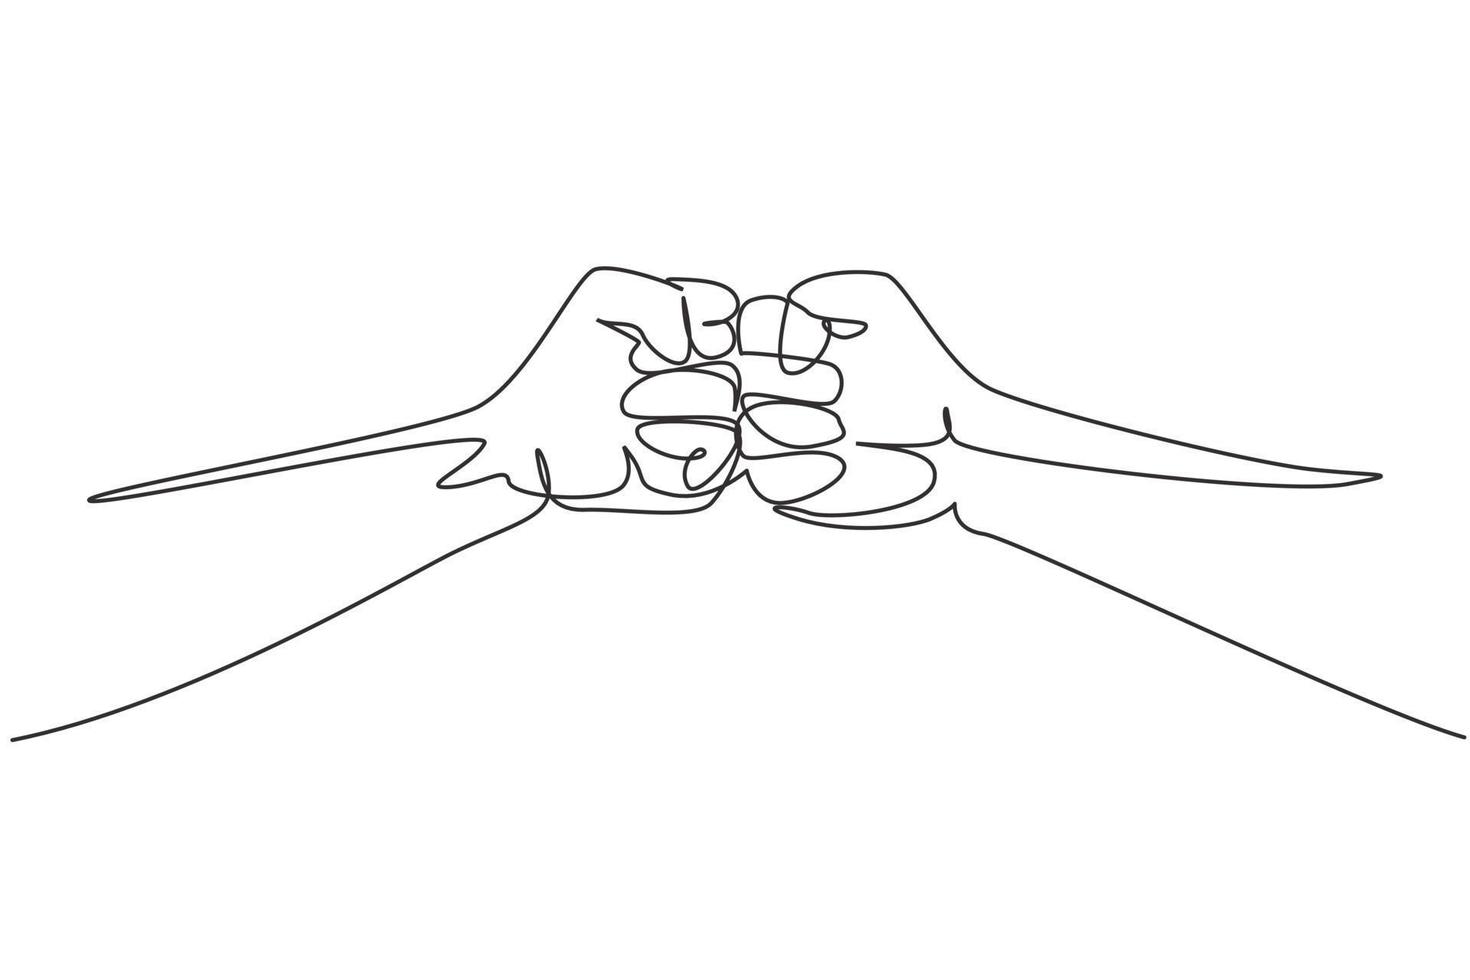 Continuous one line drawing two hands make fist bump. Sign or symbol of power, hitting, attack, force. Communication with hand gestures. Nonverbal signs. Single line design vector graphic illustration